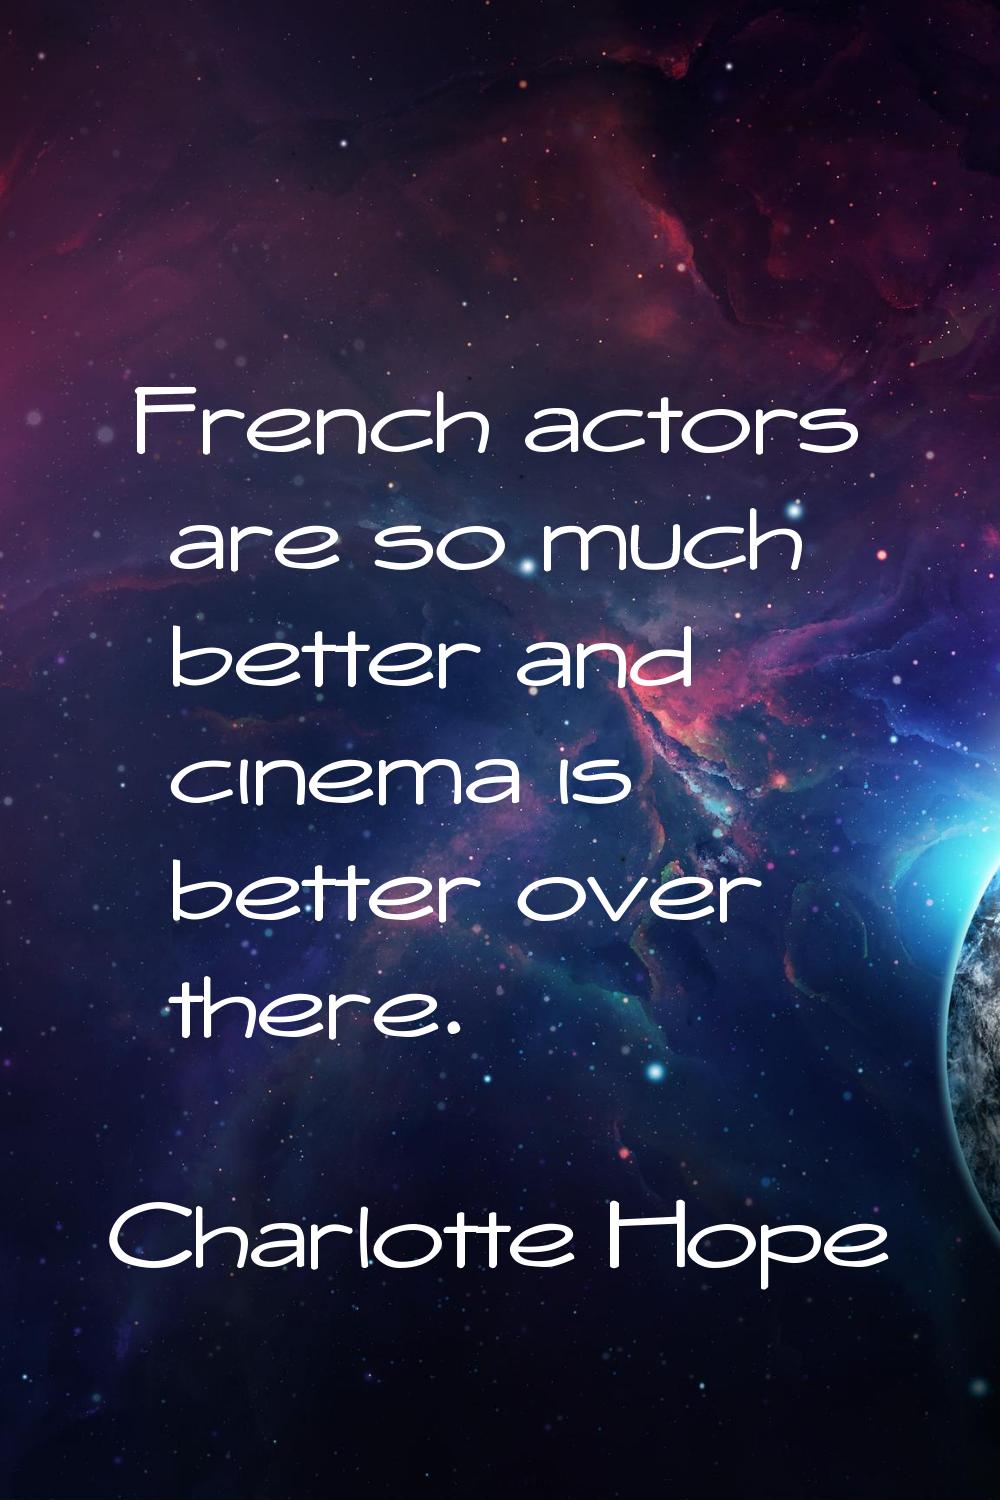 French actors are so much better and cinema is better over there.